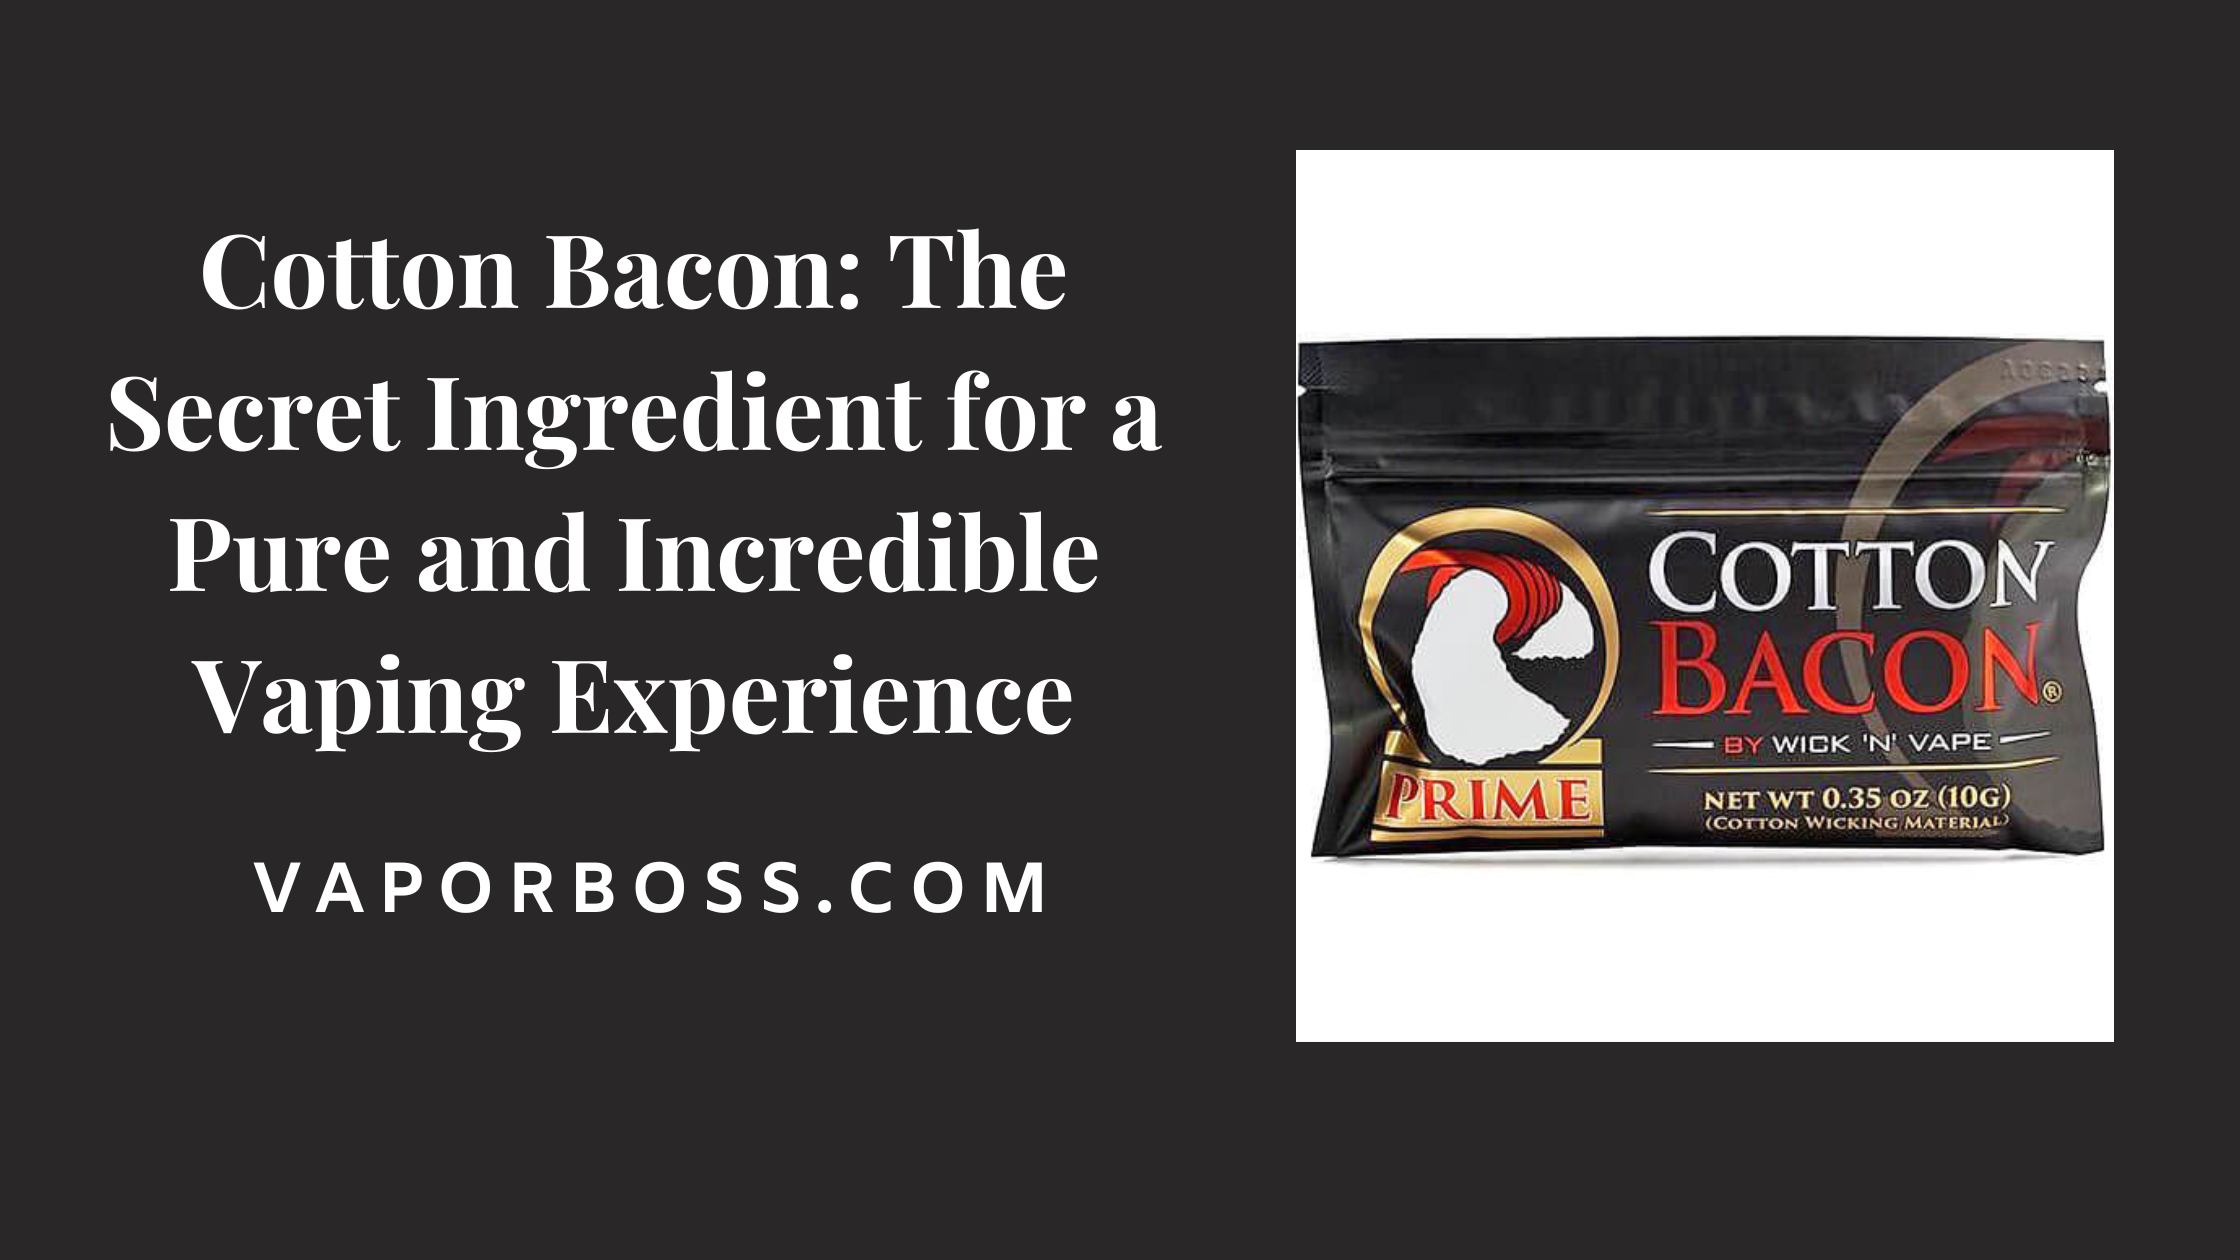 Cotton Bacon: The Secret Ingredient for a Pure and Incredible Vaping Experience